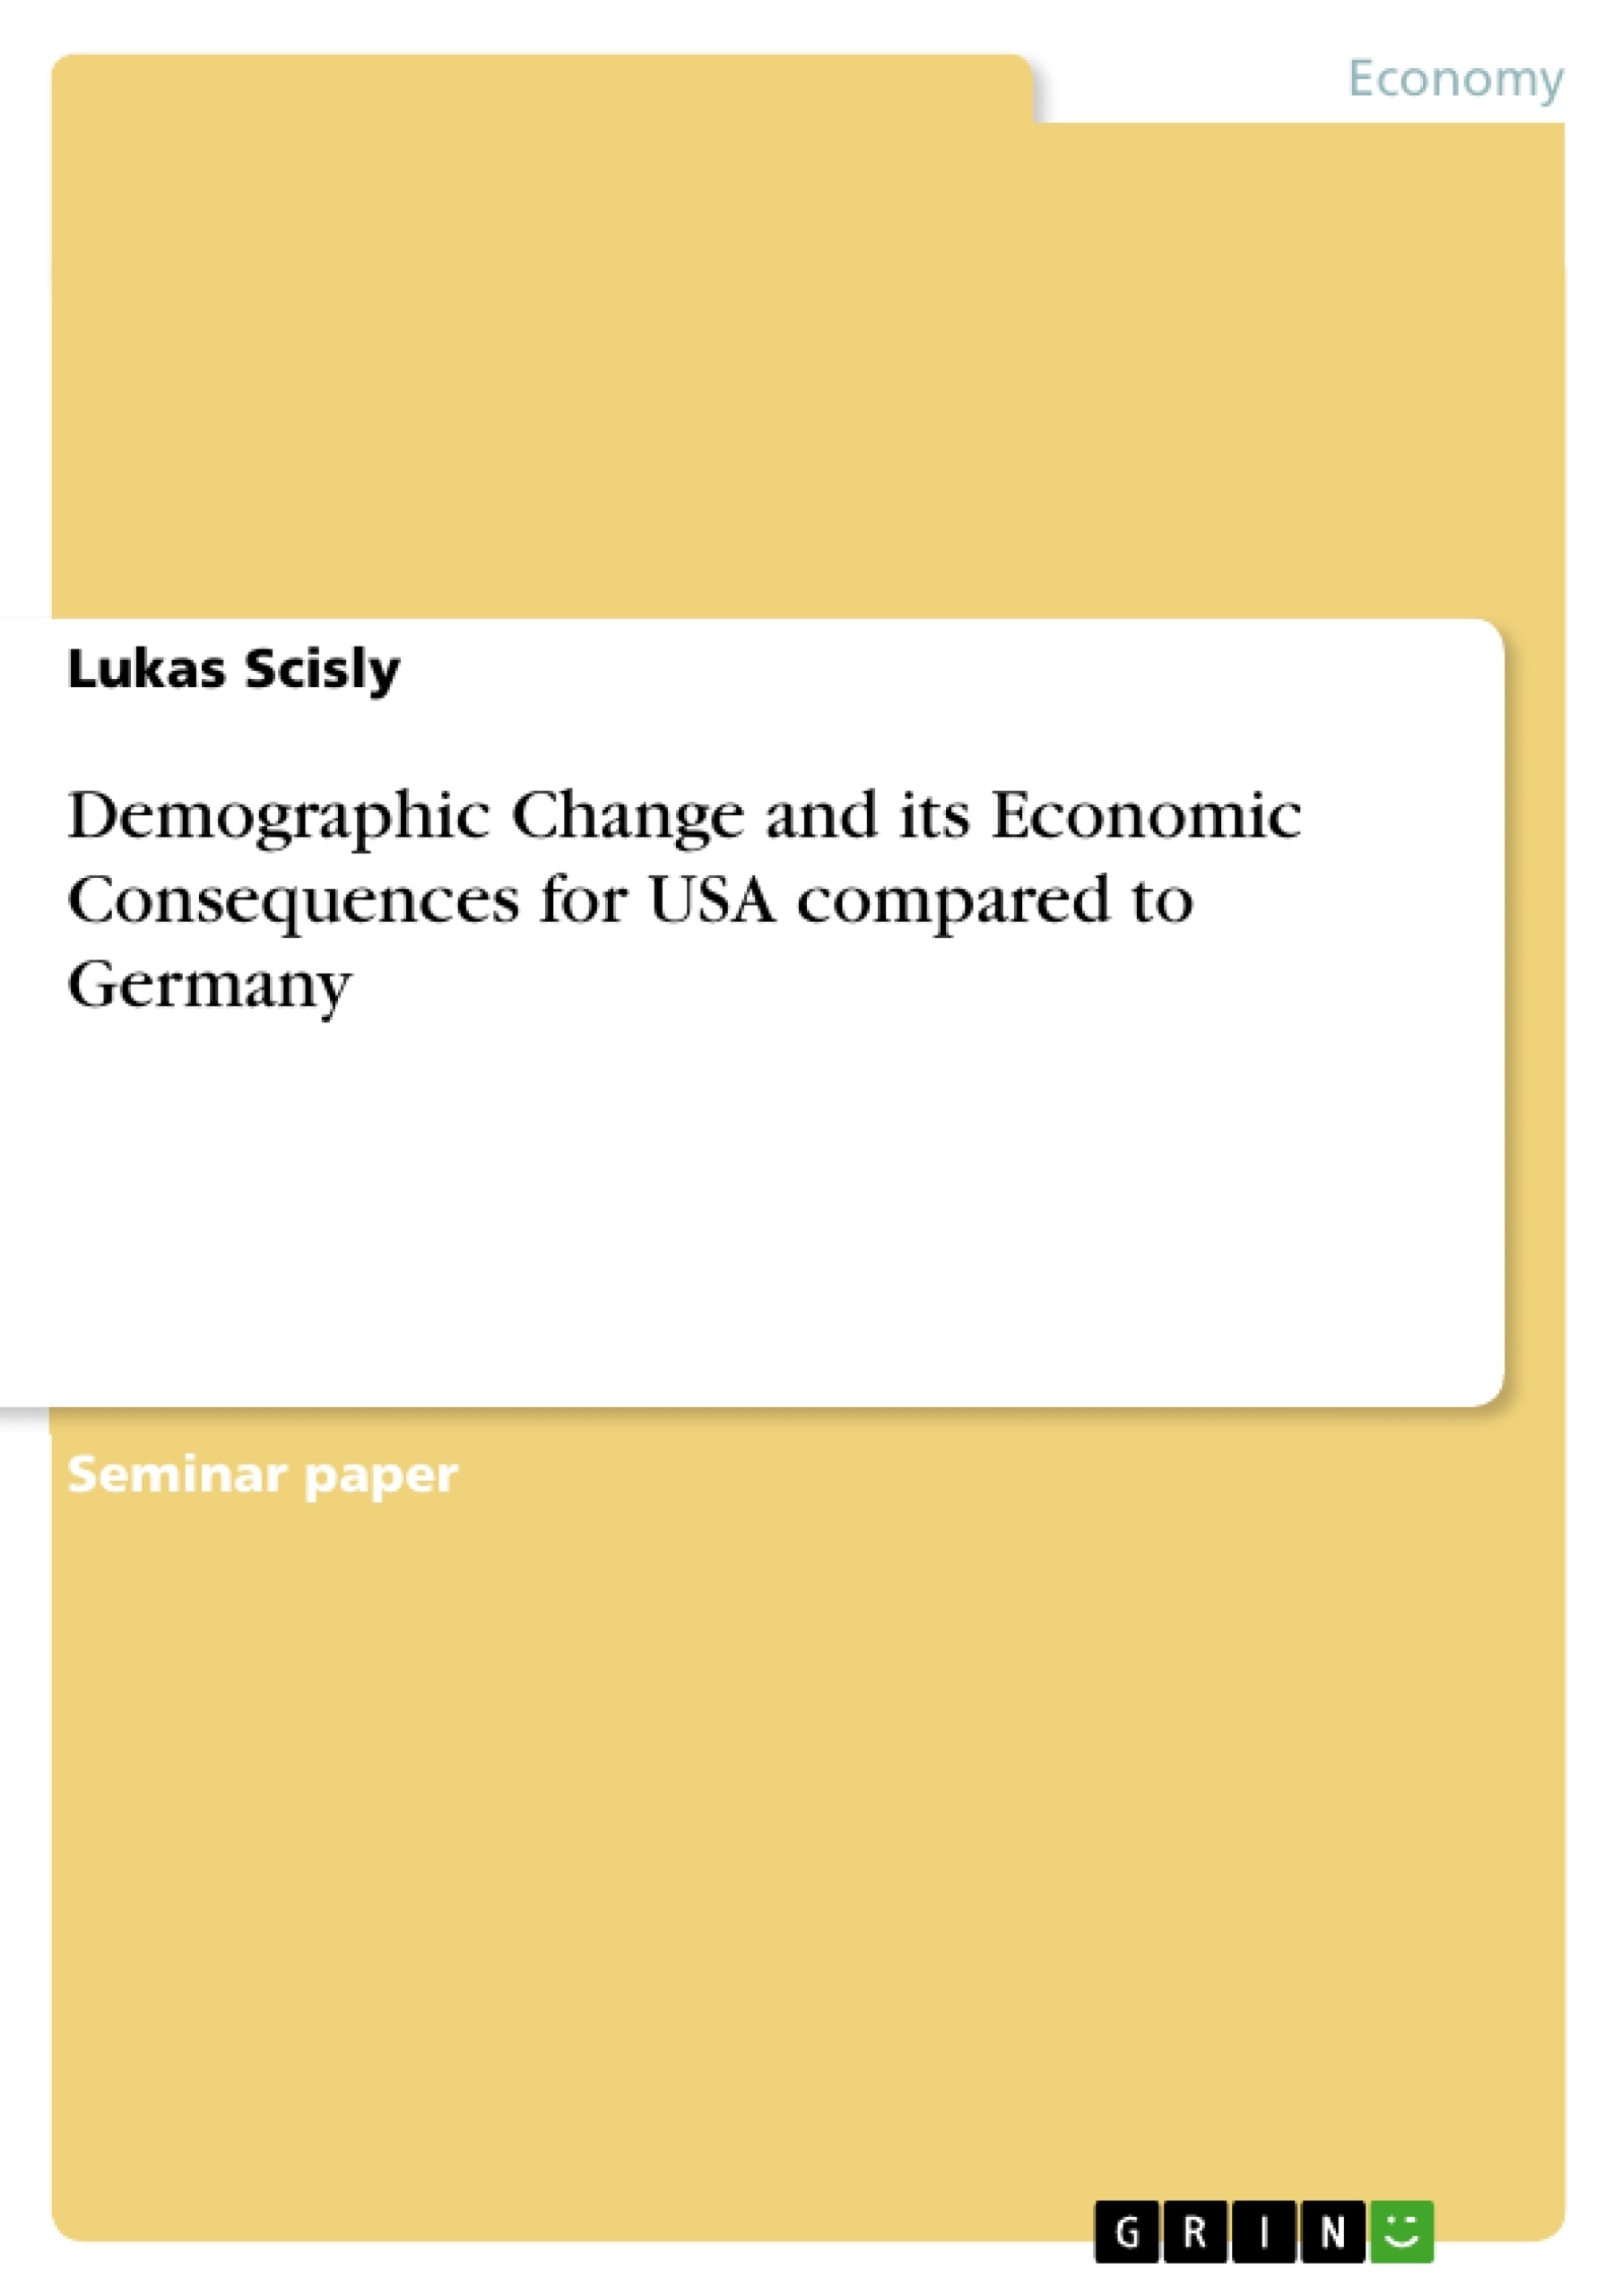 Titre: Demographic Change and its Economic Consequences for USA compared to Germany